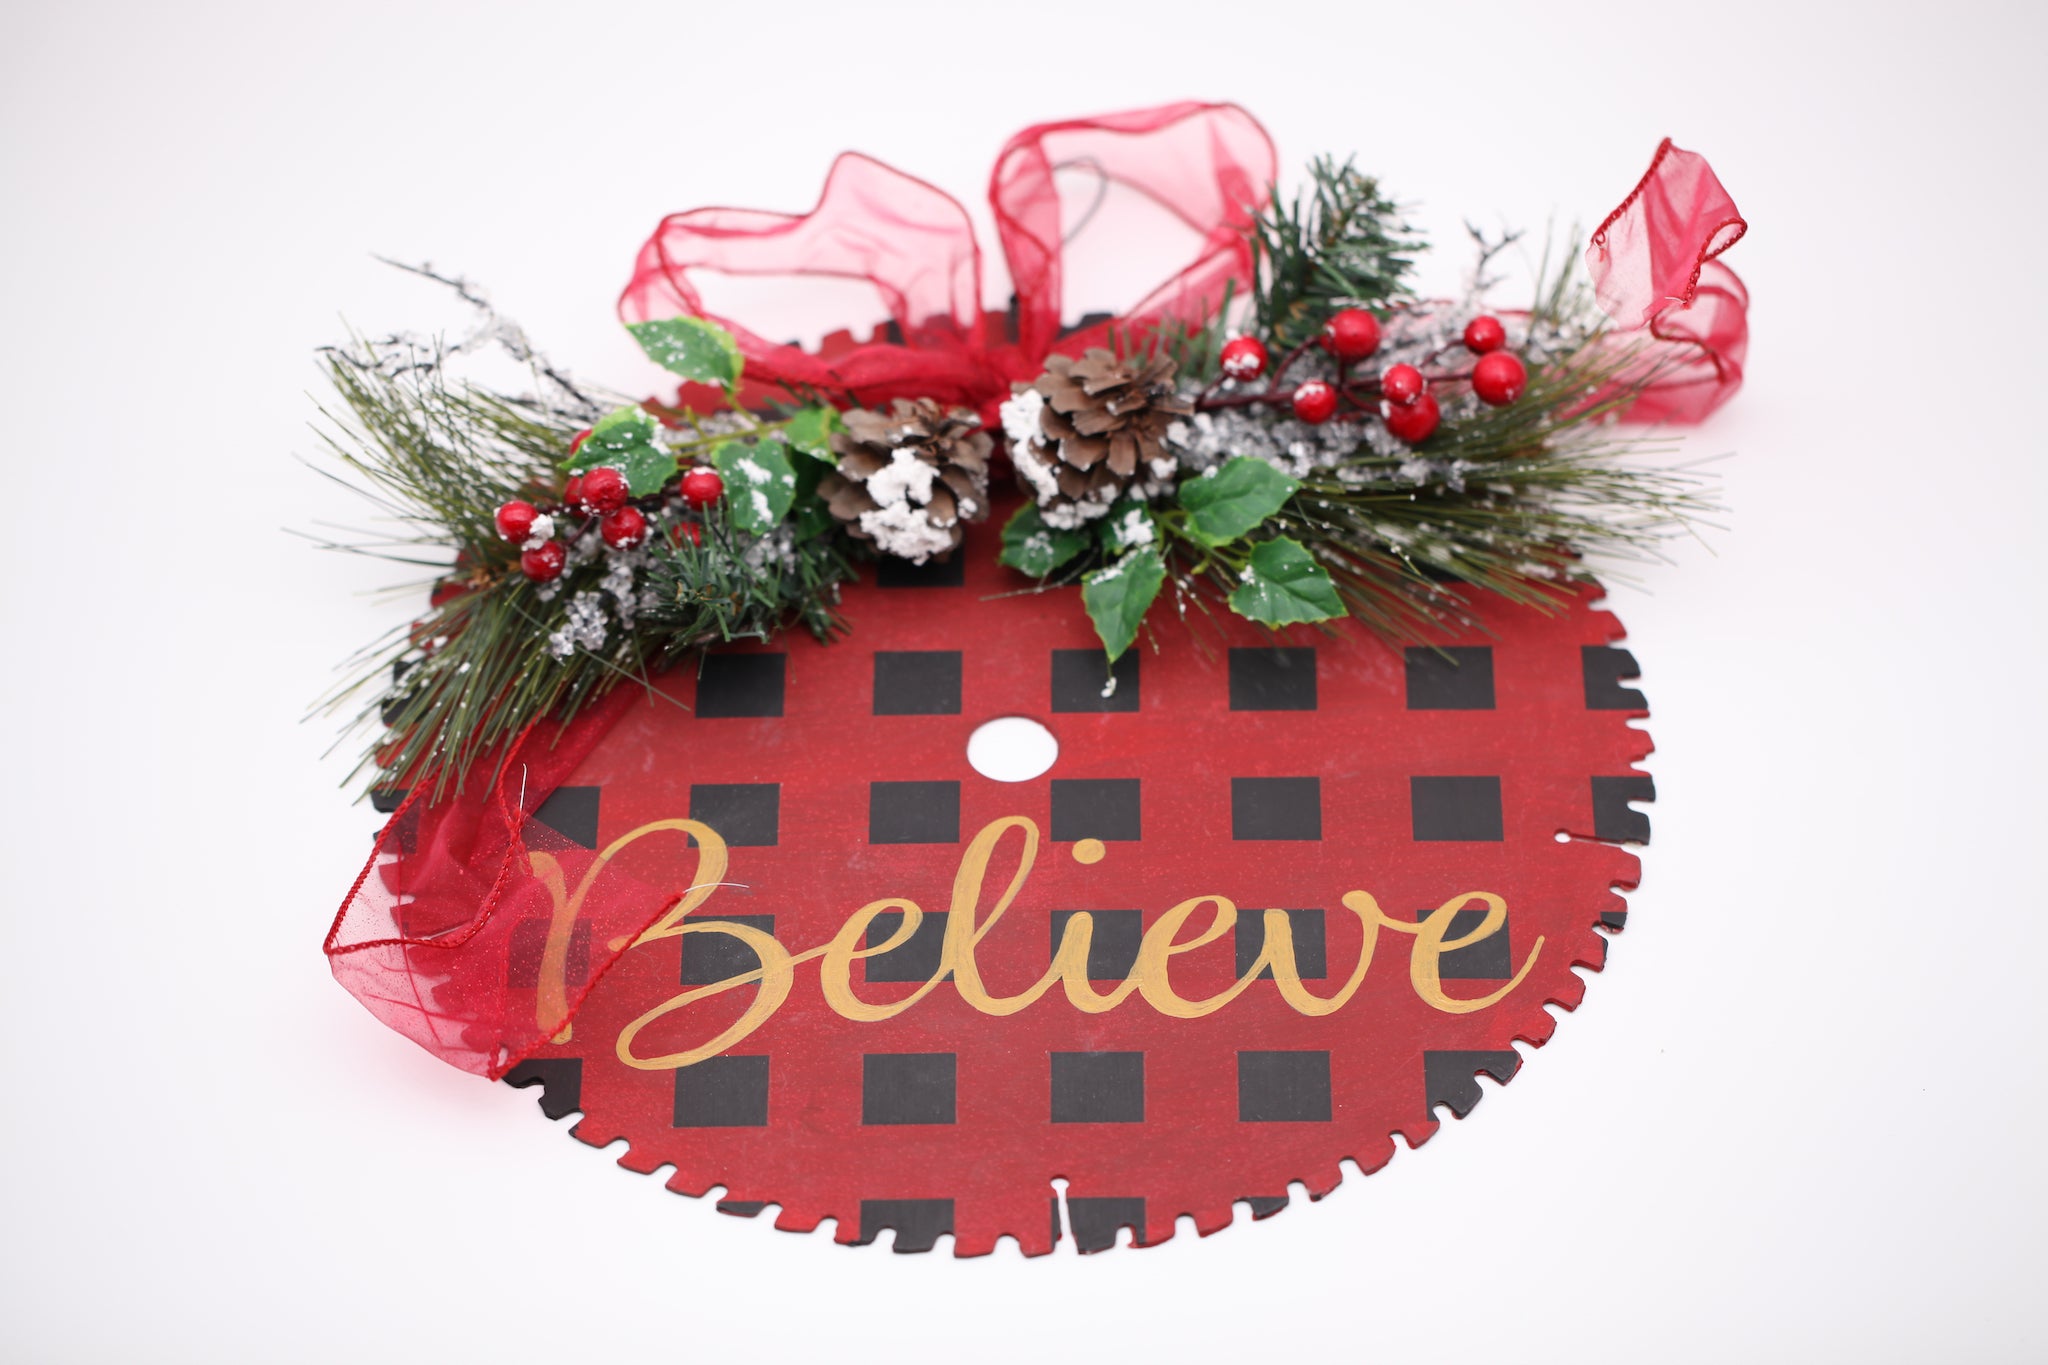 "Believe" Saw-blade Sign